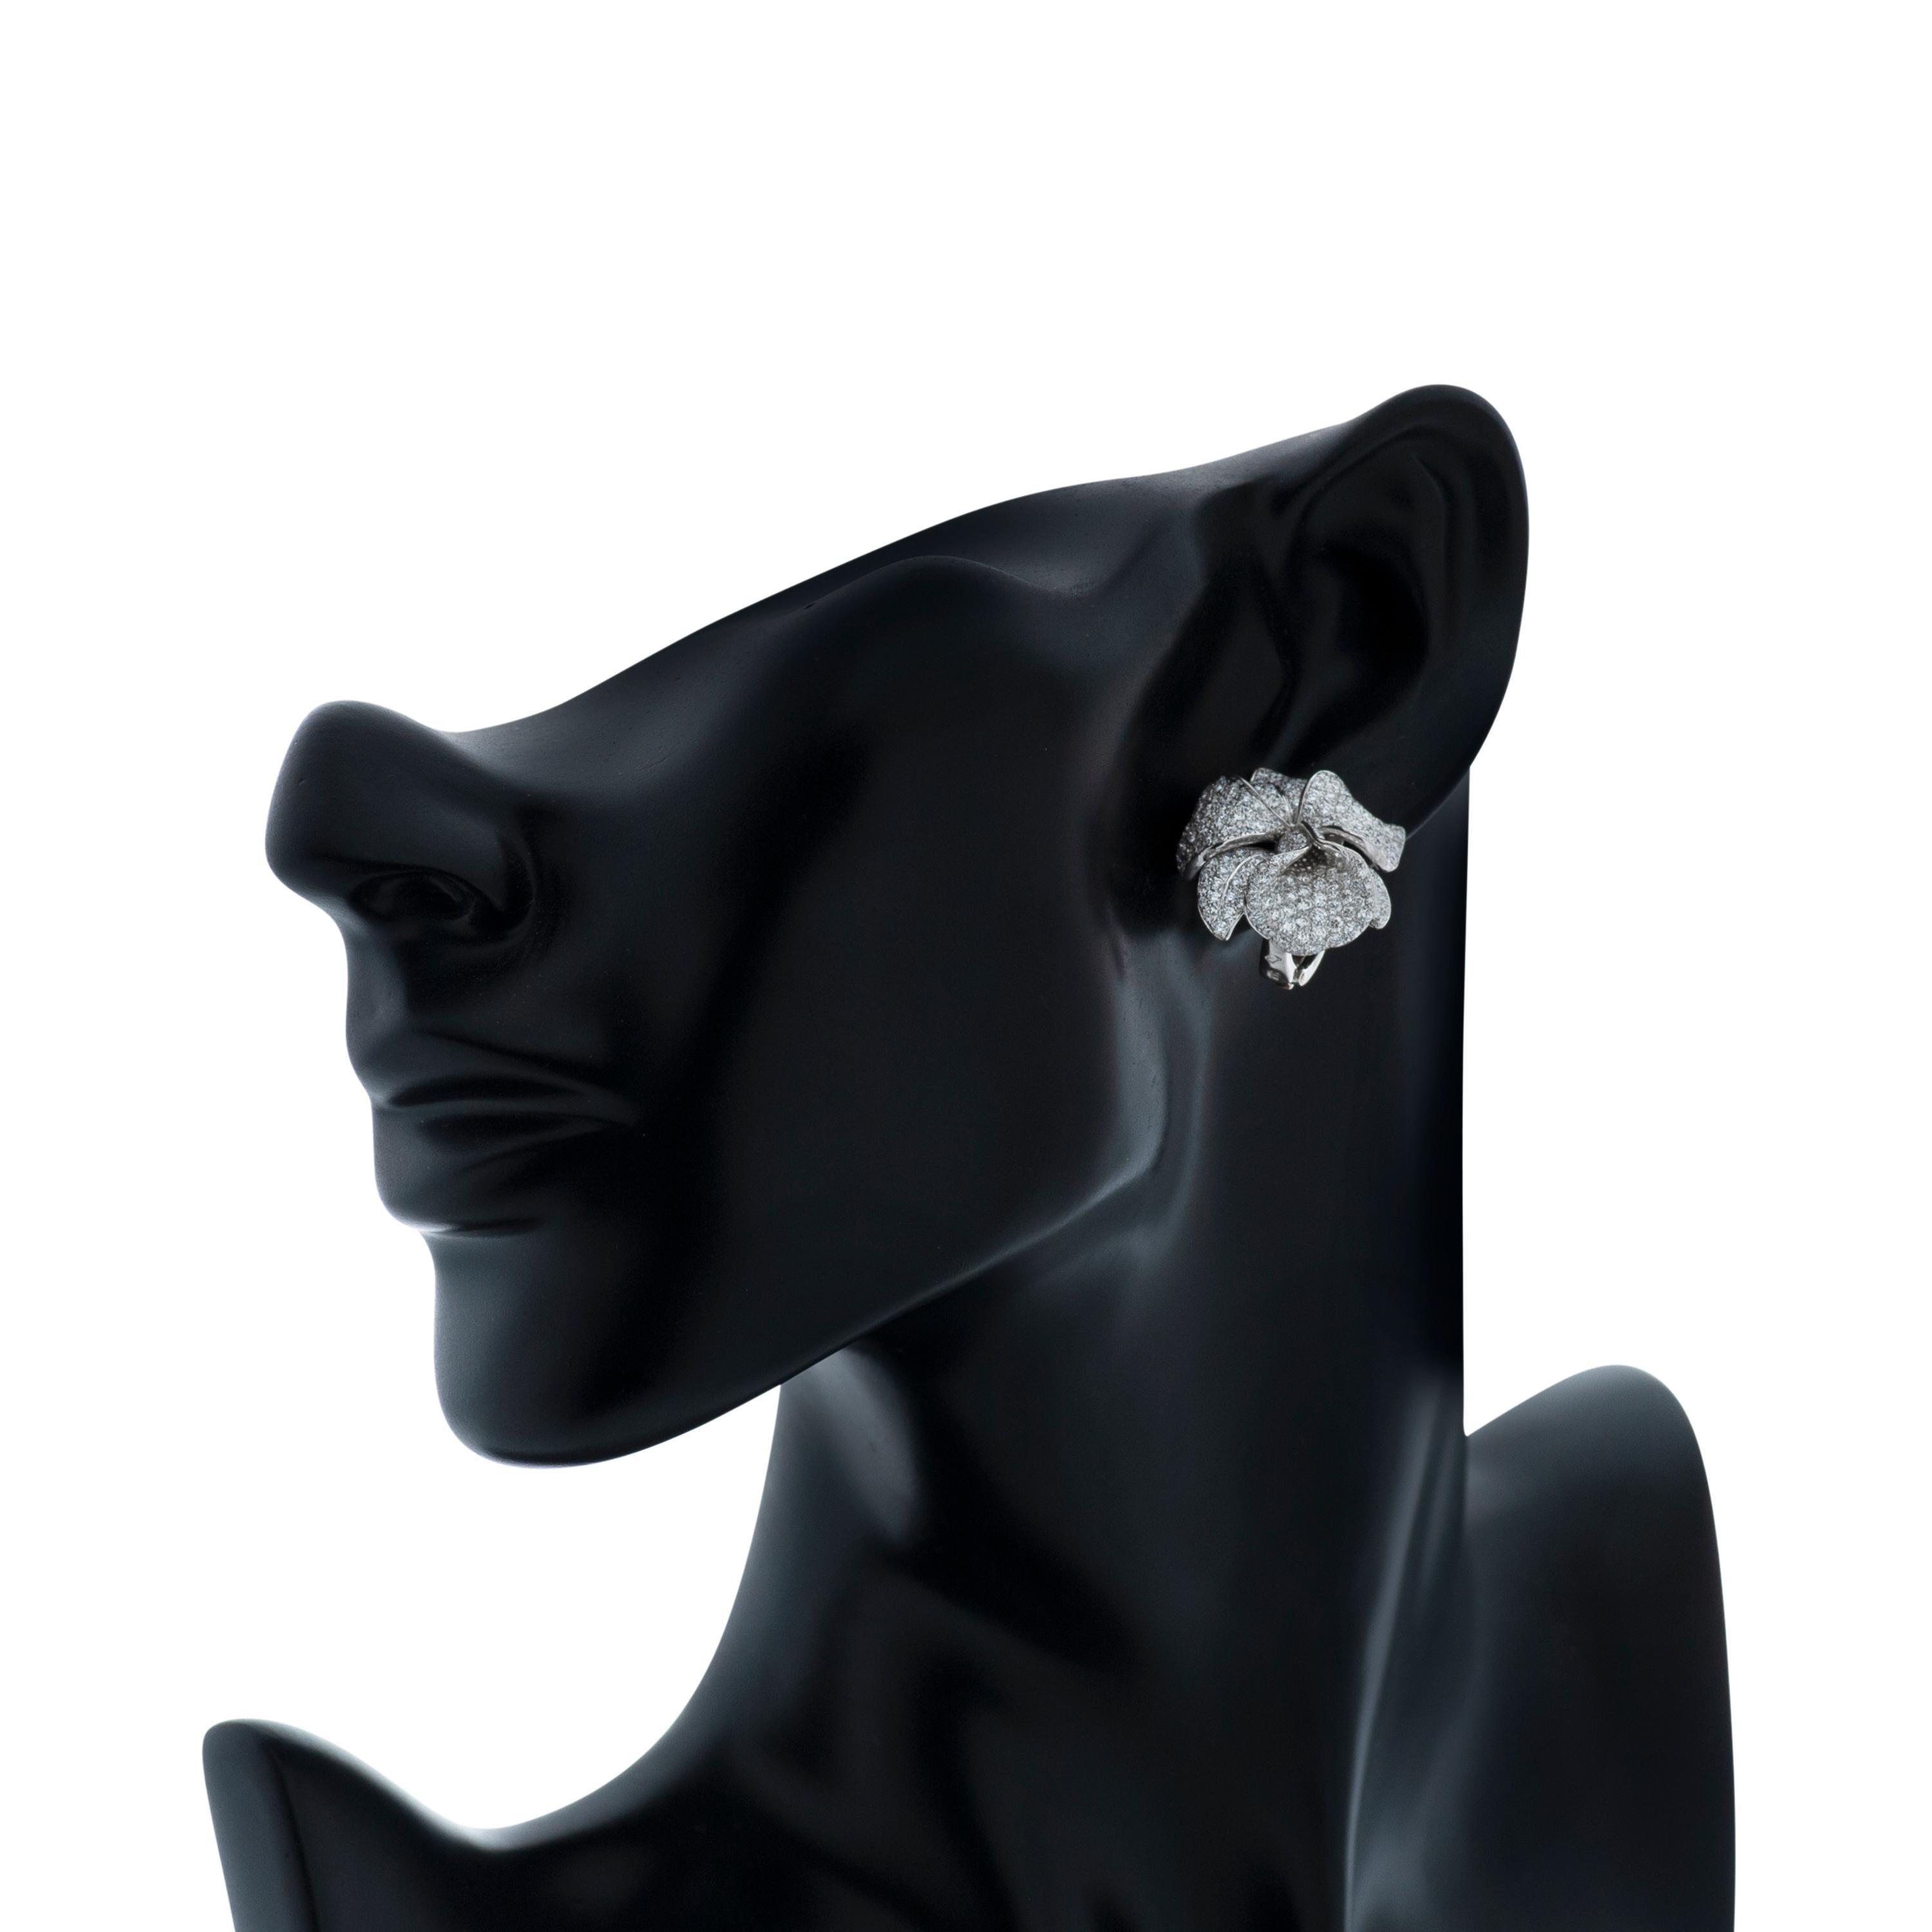 Cartier Caresse D'Orchidees diamond flower earrings, accompanied by Cartier paperwork.

This pair of Cartier earrings feature 531 round brilliant cut diamonds totaling 5.53 carats pave set in platinum.

Each earring measures approximately 25mm tall